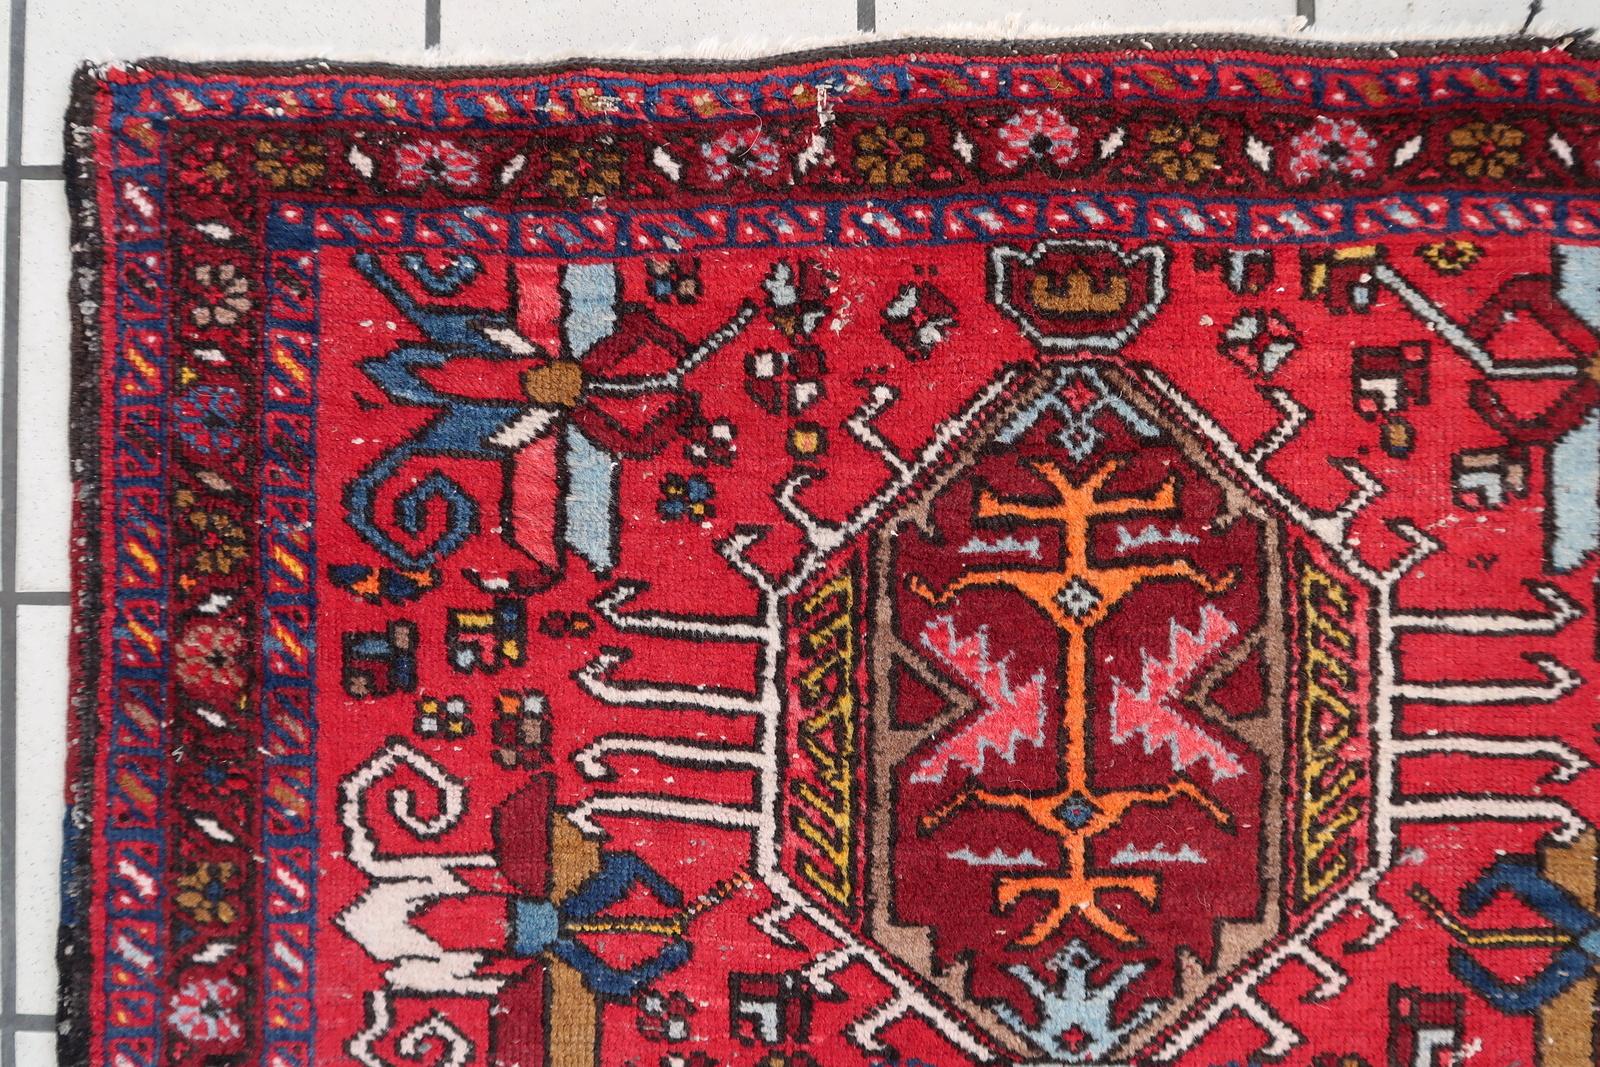 Handmade Antique Persian Style Karajeh Rug from the 1920s:

Dimensions:
Size: 2.9’ x 4.6’ (90cm x 143cm)
Shape: Rectangular
Material and Condition:
Crafted from wool, this rug ensures both durability and a soft feel underfoot.
Despite showing some